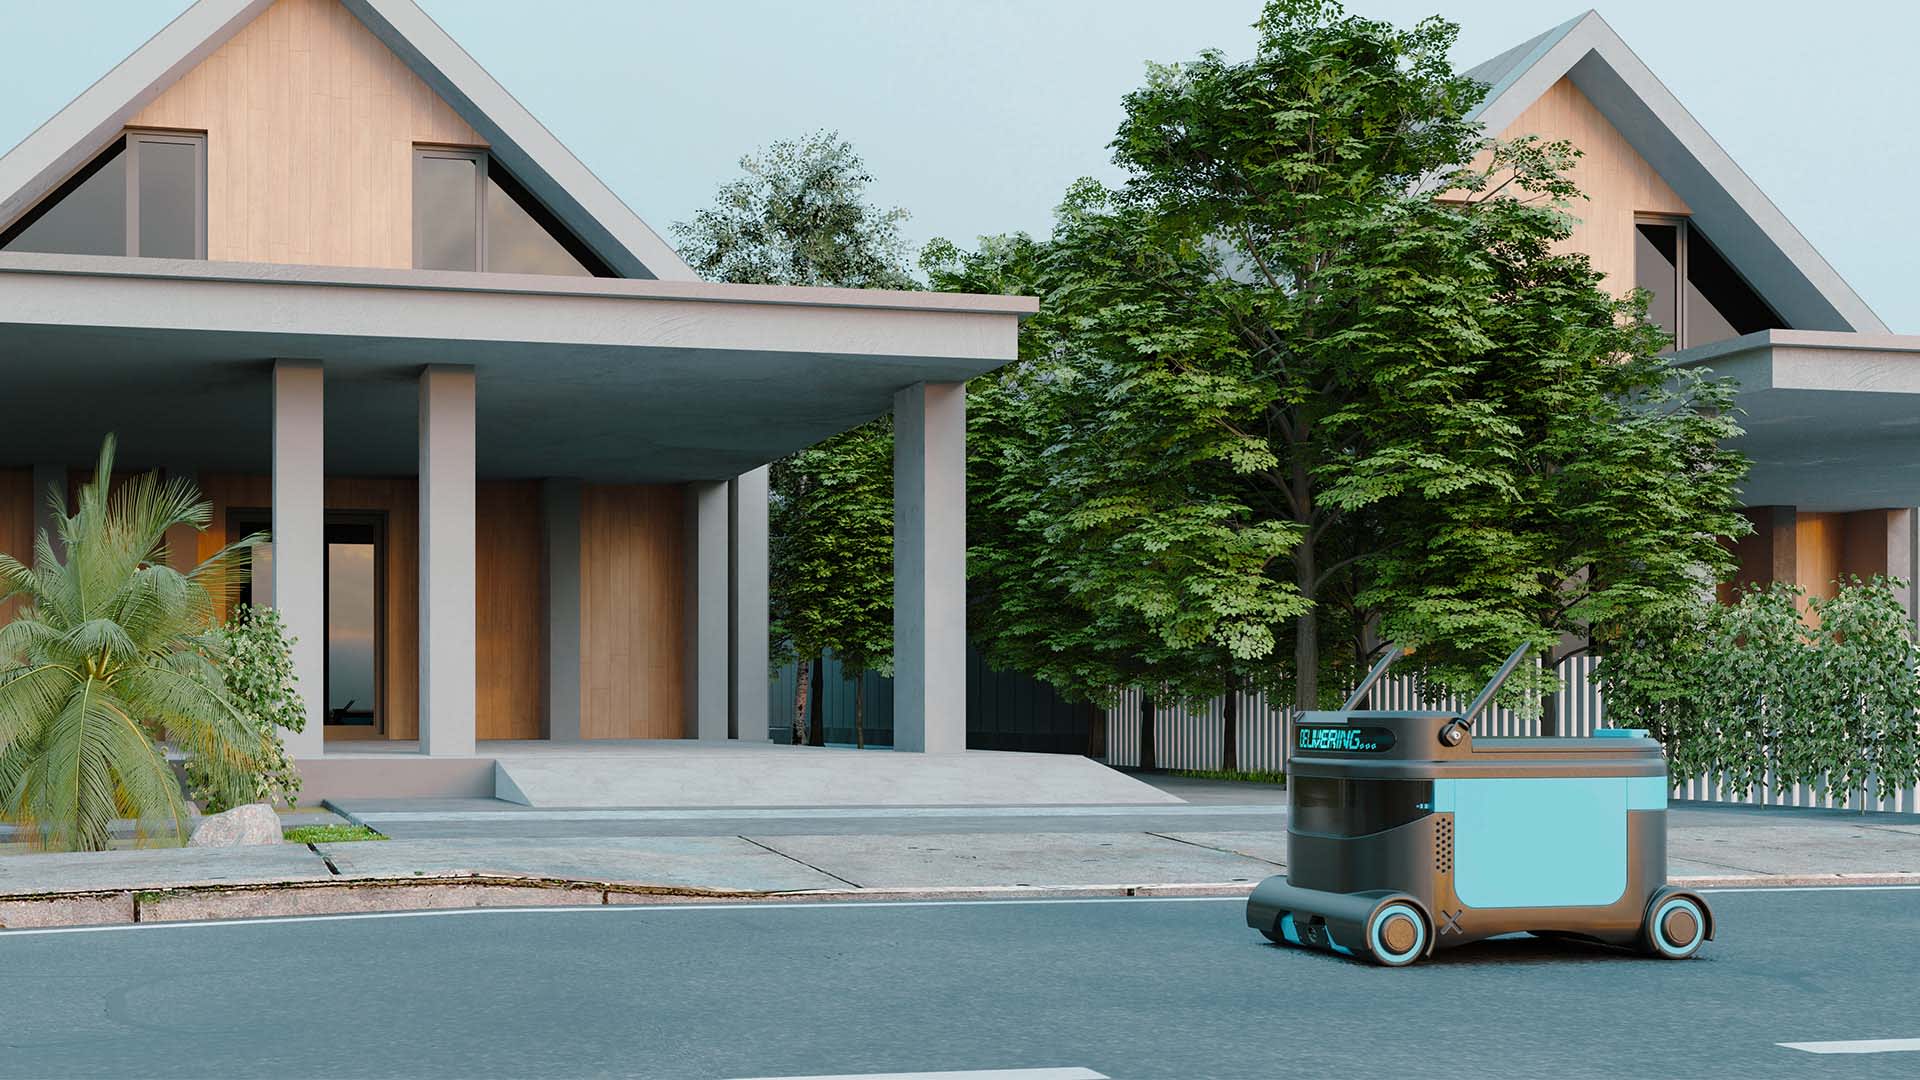 Why Delivery Robots Could Leave Driverless Cars in the Dust